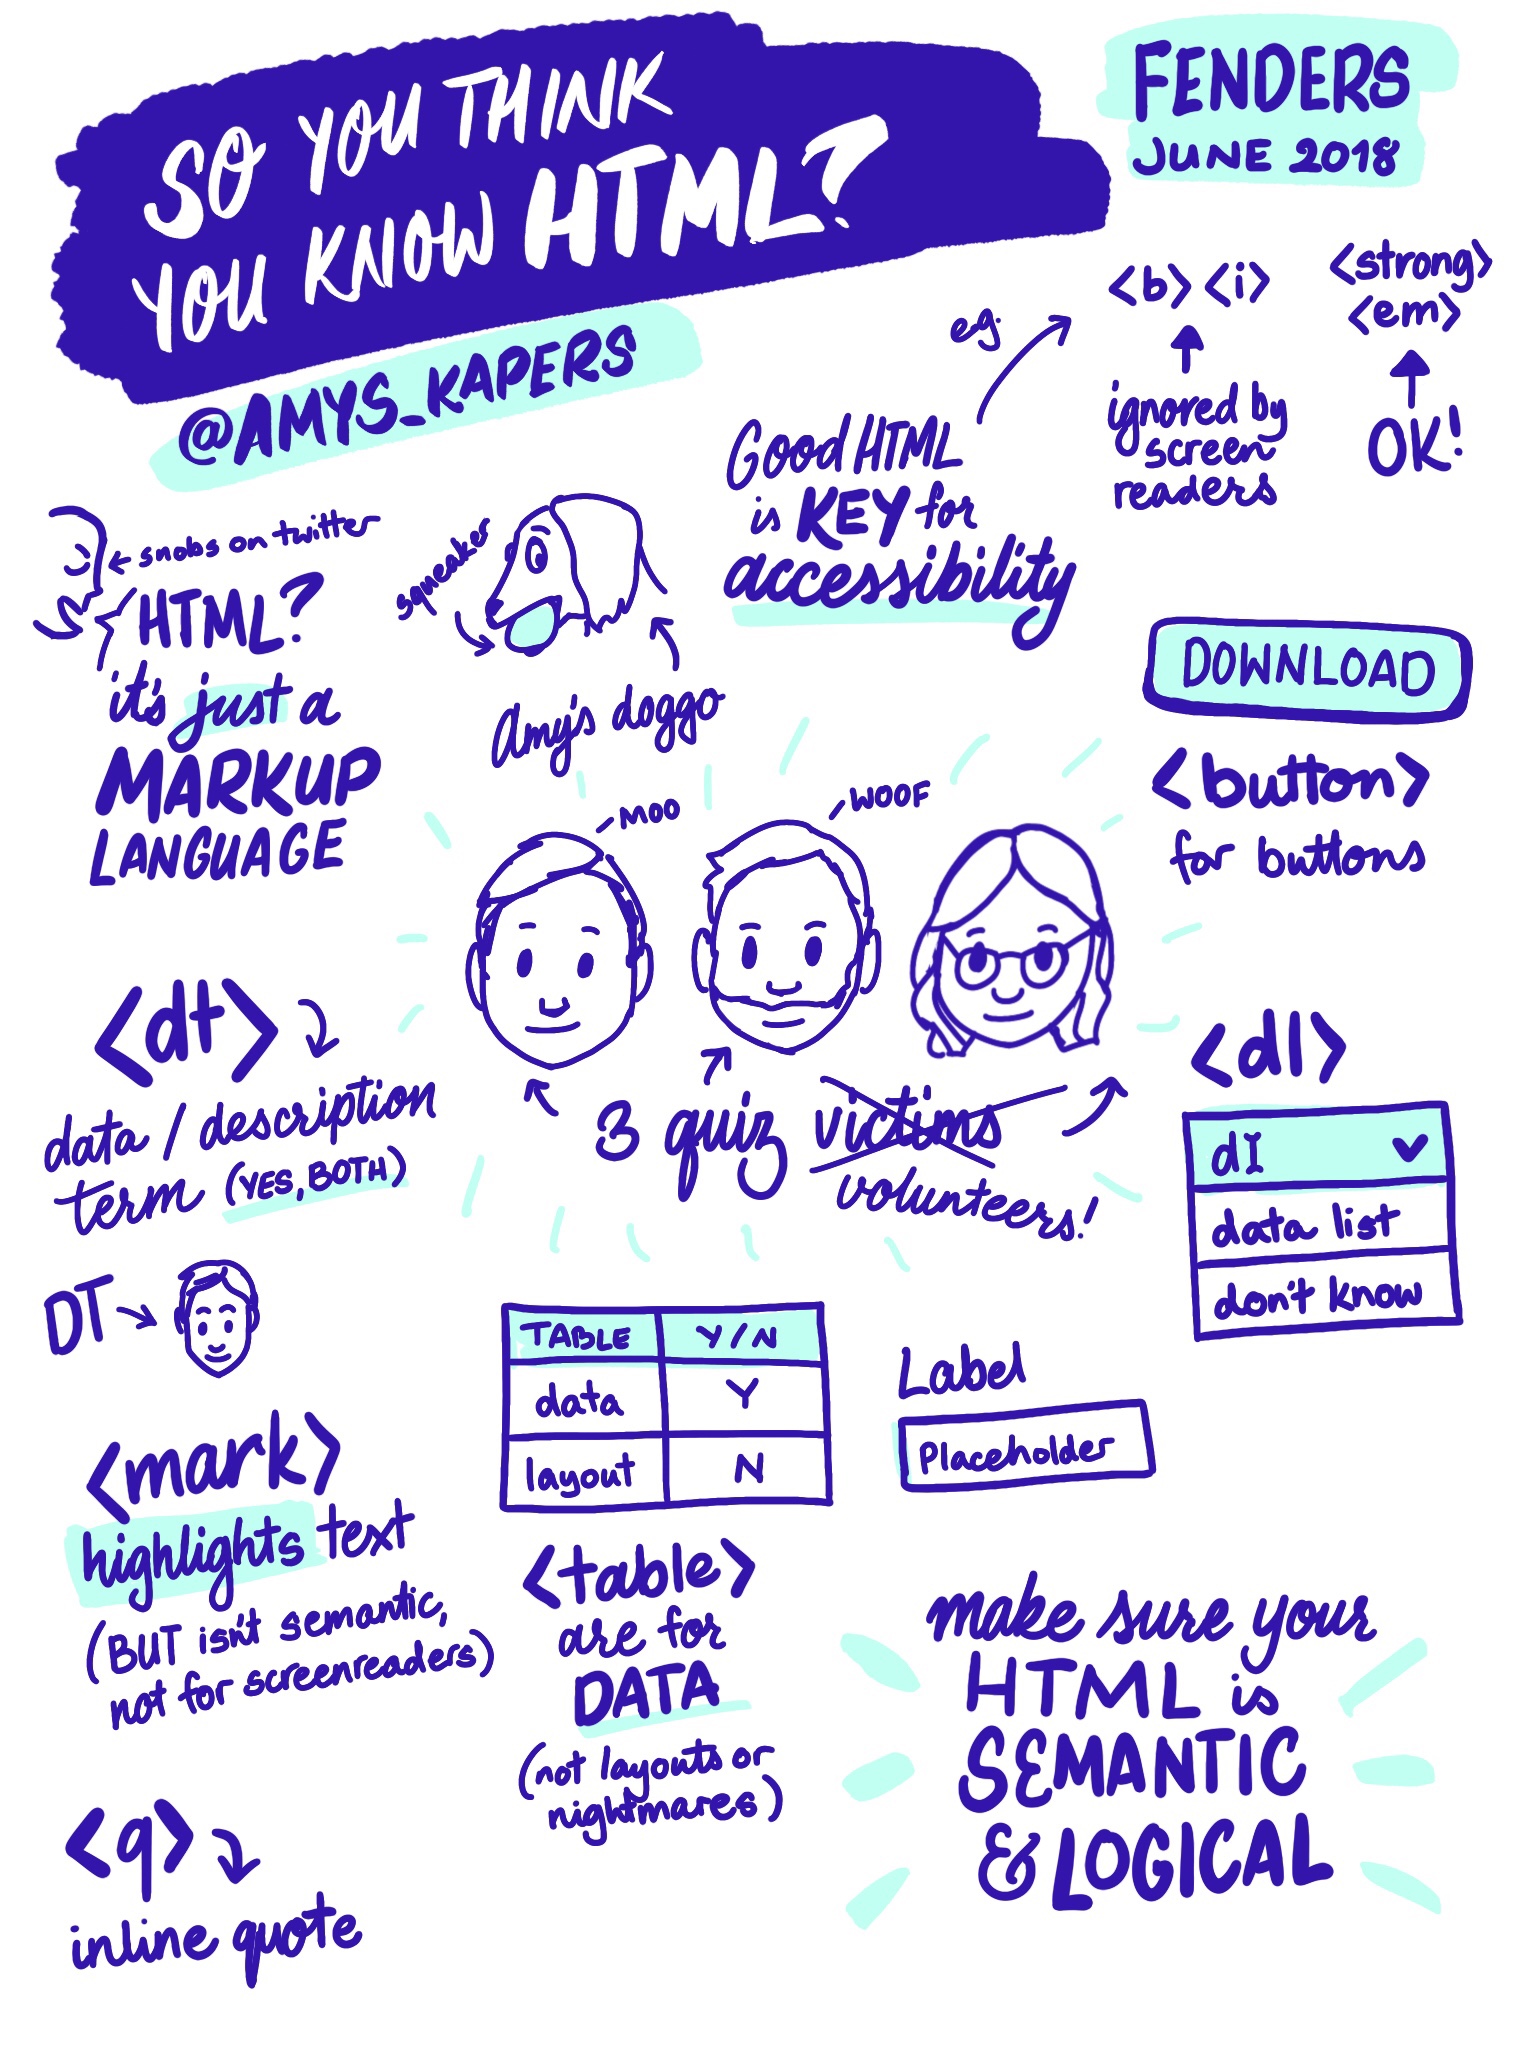 Sketchnote of “So you think you know HTML?” By Amy Kapernick